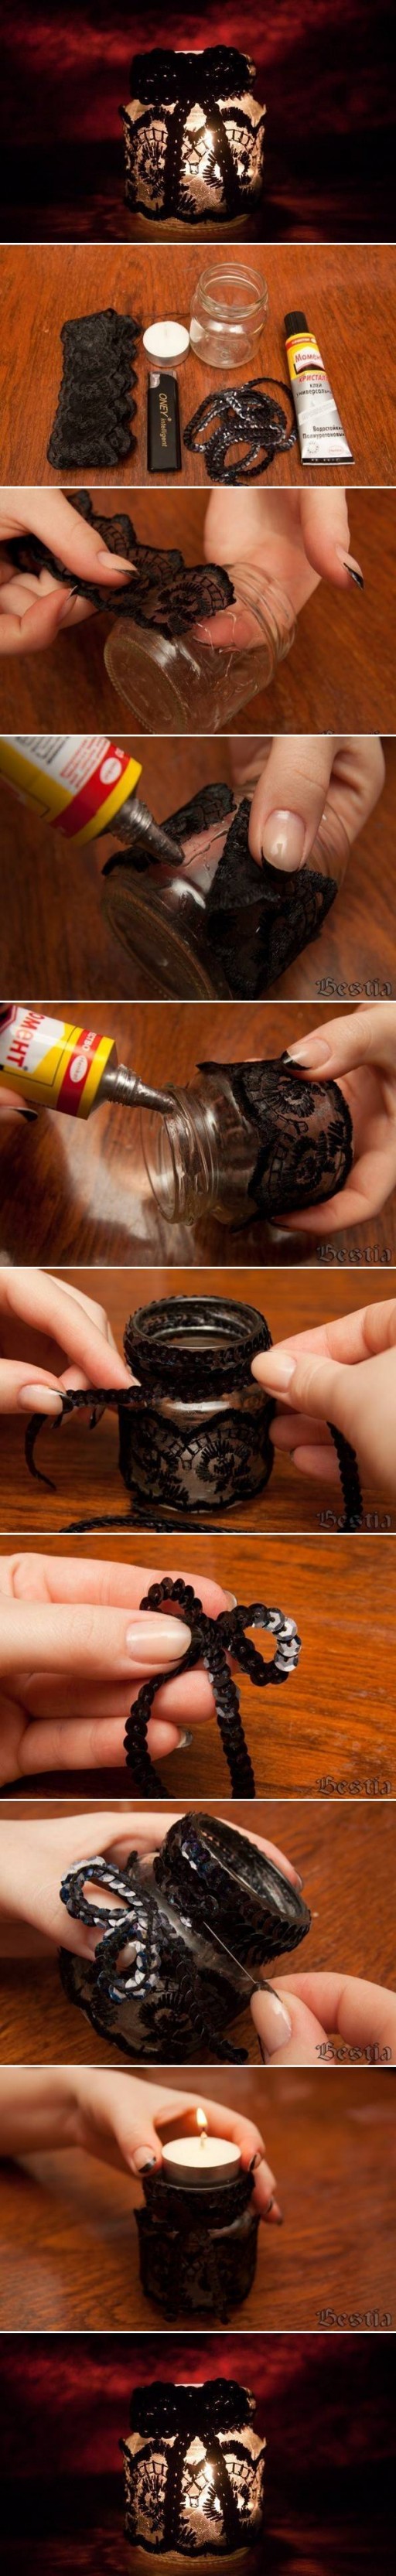 How to Make Lace Decorated Candle Holder step by step DIY tutorial instructions